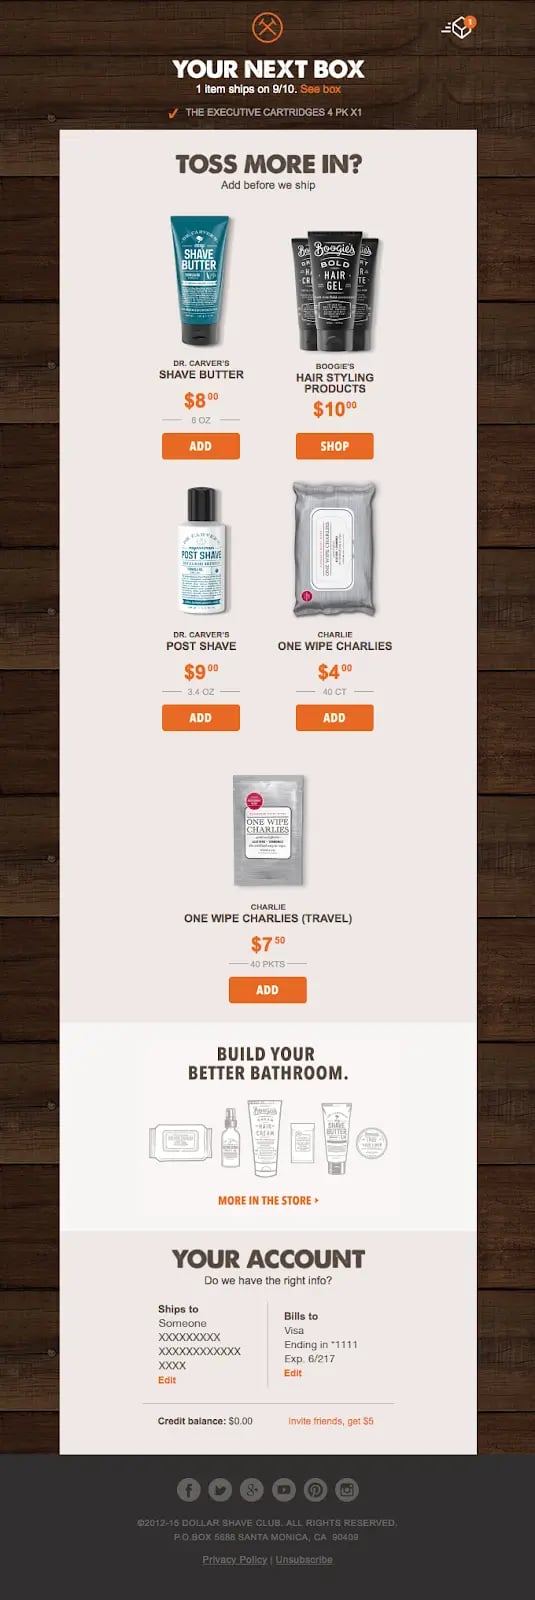 Dollar shave club item recommendations email